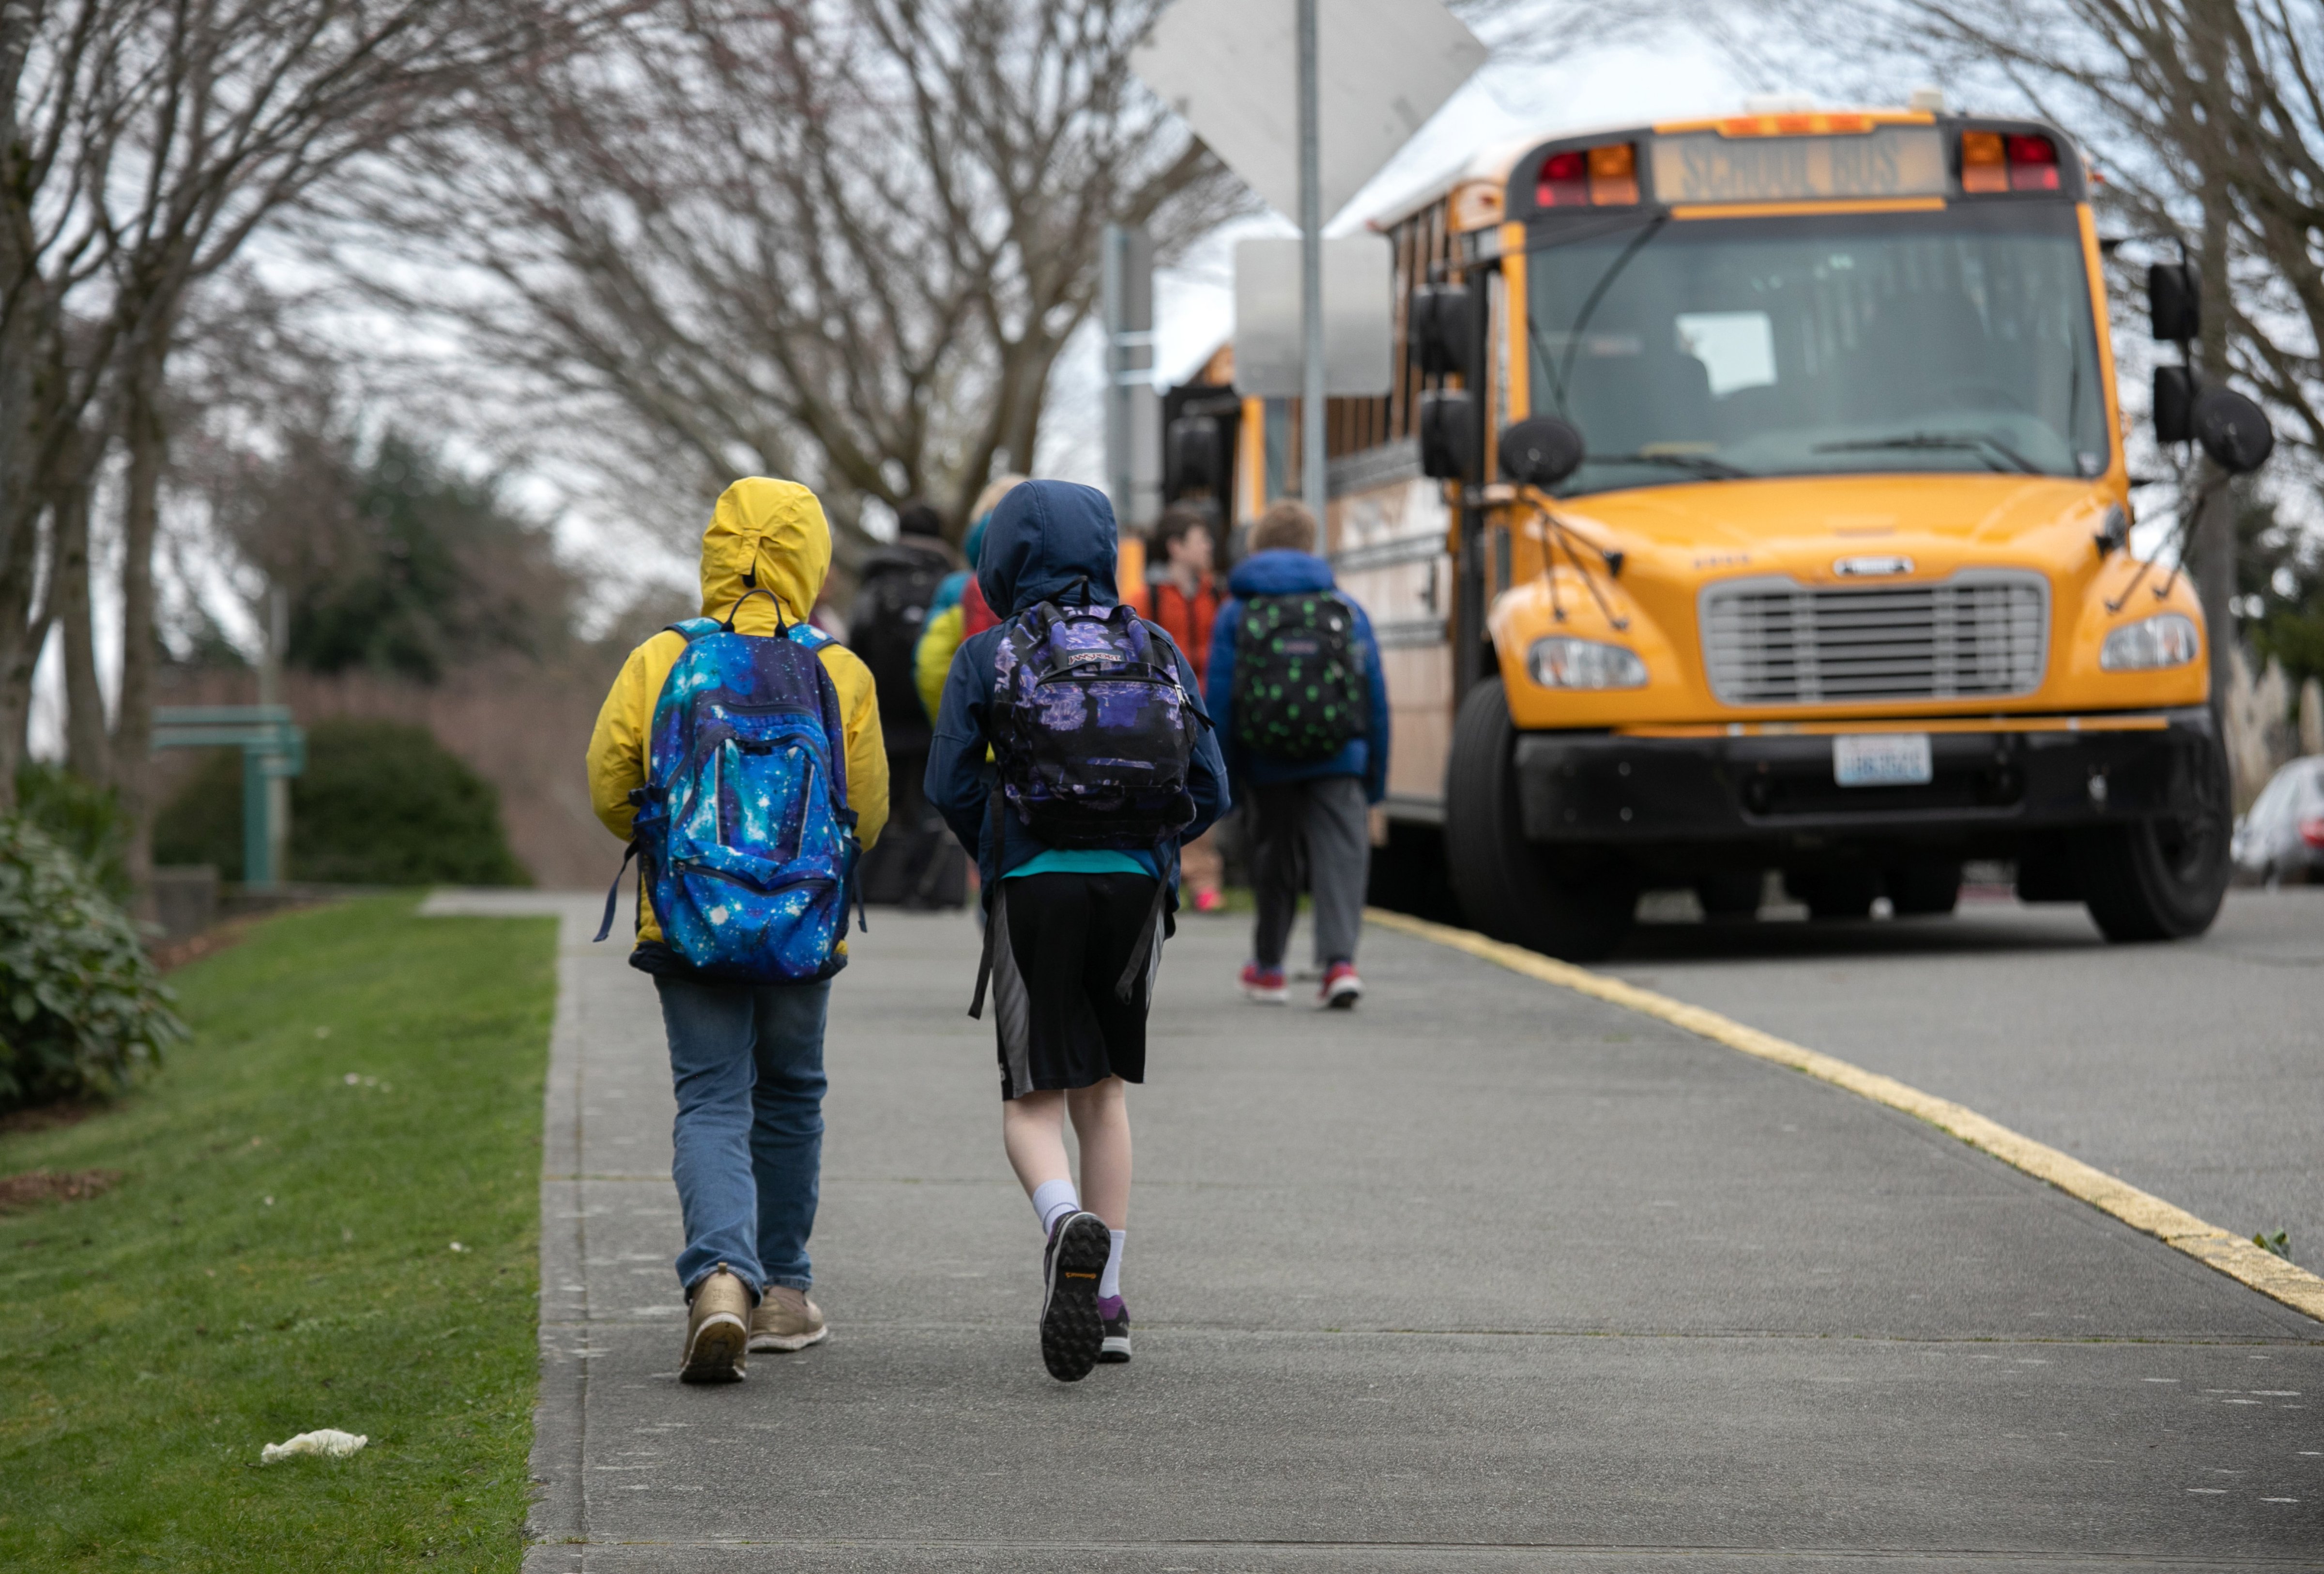 Students leave an elementary school in Seattle, Washington, after the Seattle Public School system closed due to coronavirus concerns on March 11, 2020. (John Moore—Getty Images)